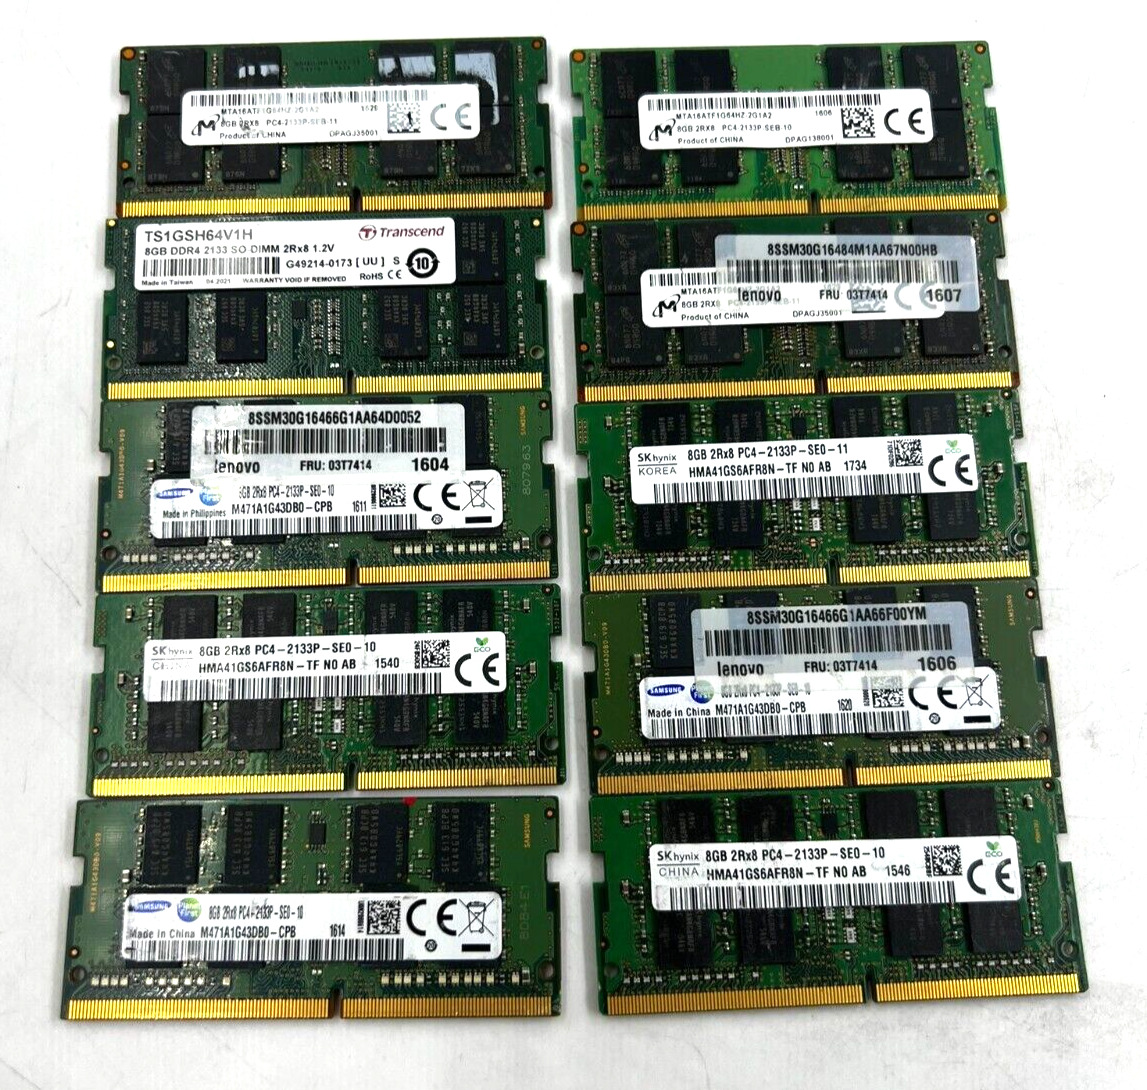 LAPTOP RAM -*LOT OF 10* MIXED BRANDS 8GB 2RX8 PC4 - 2133P